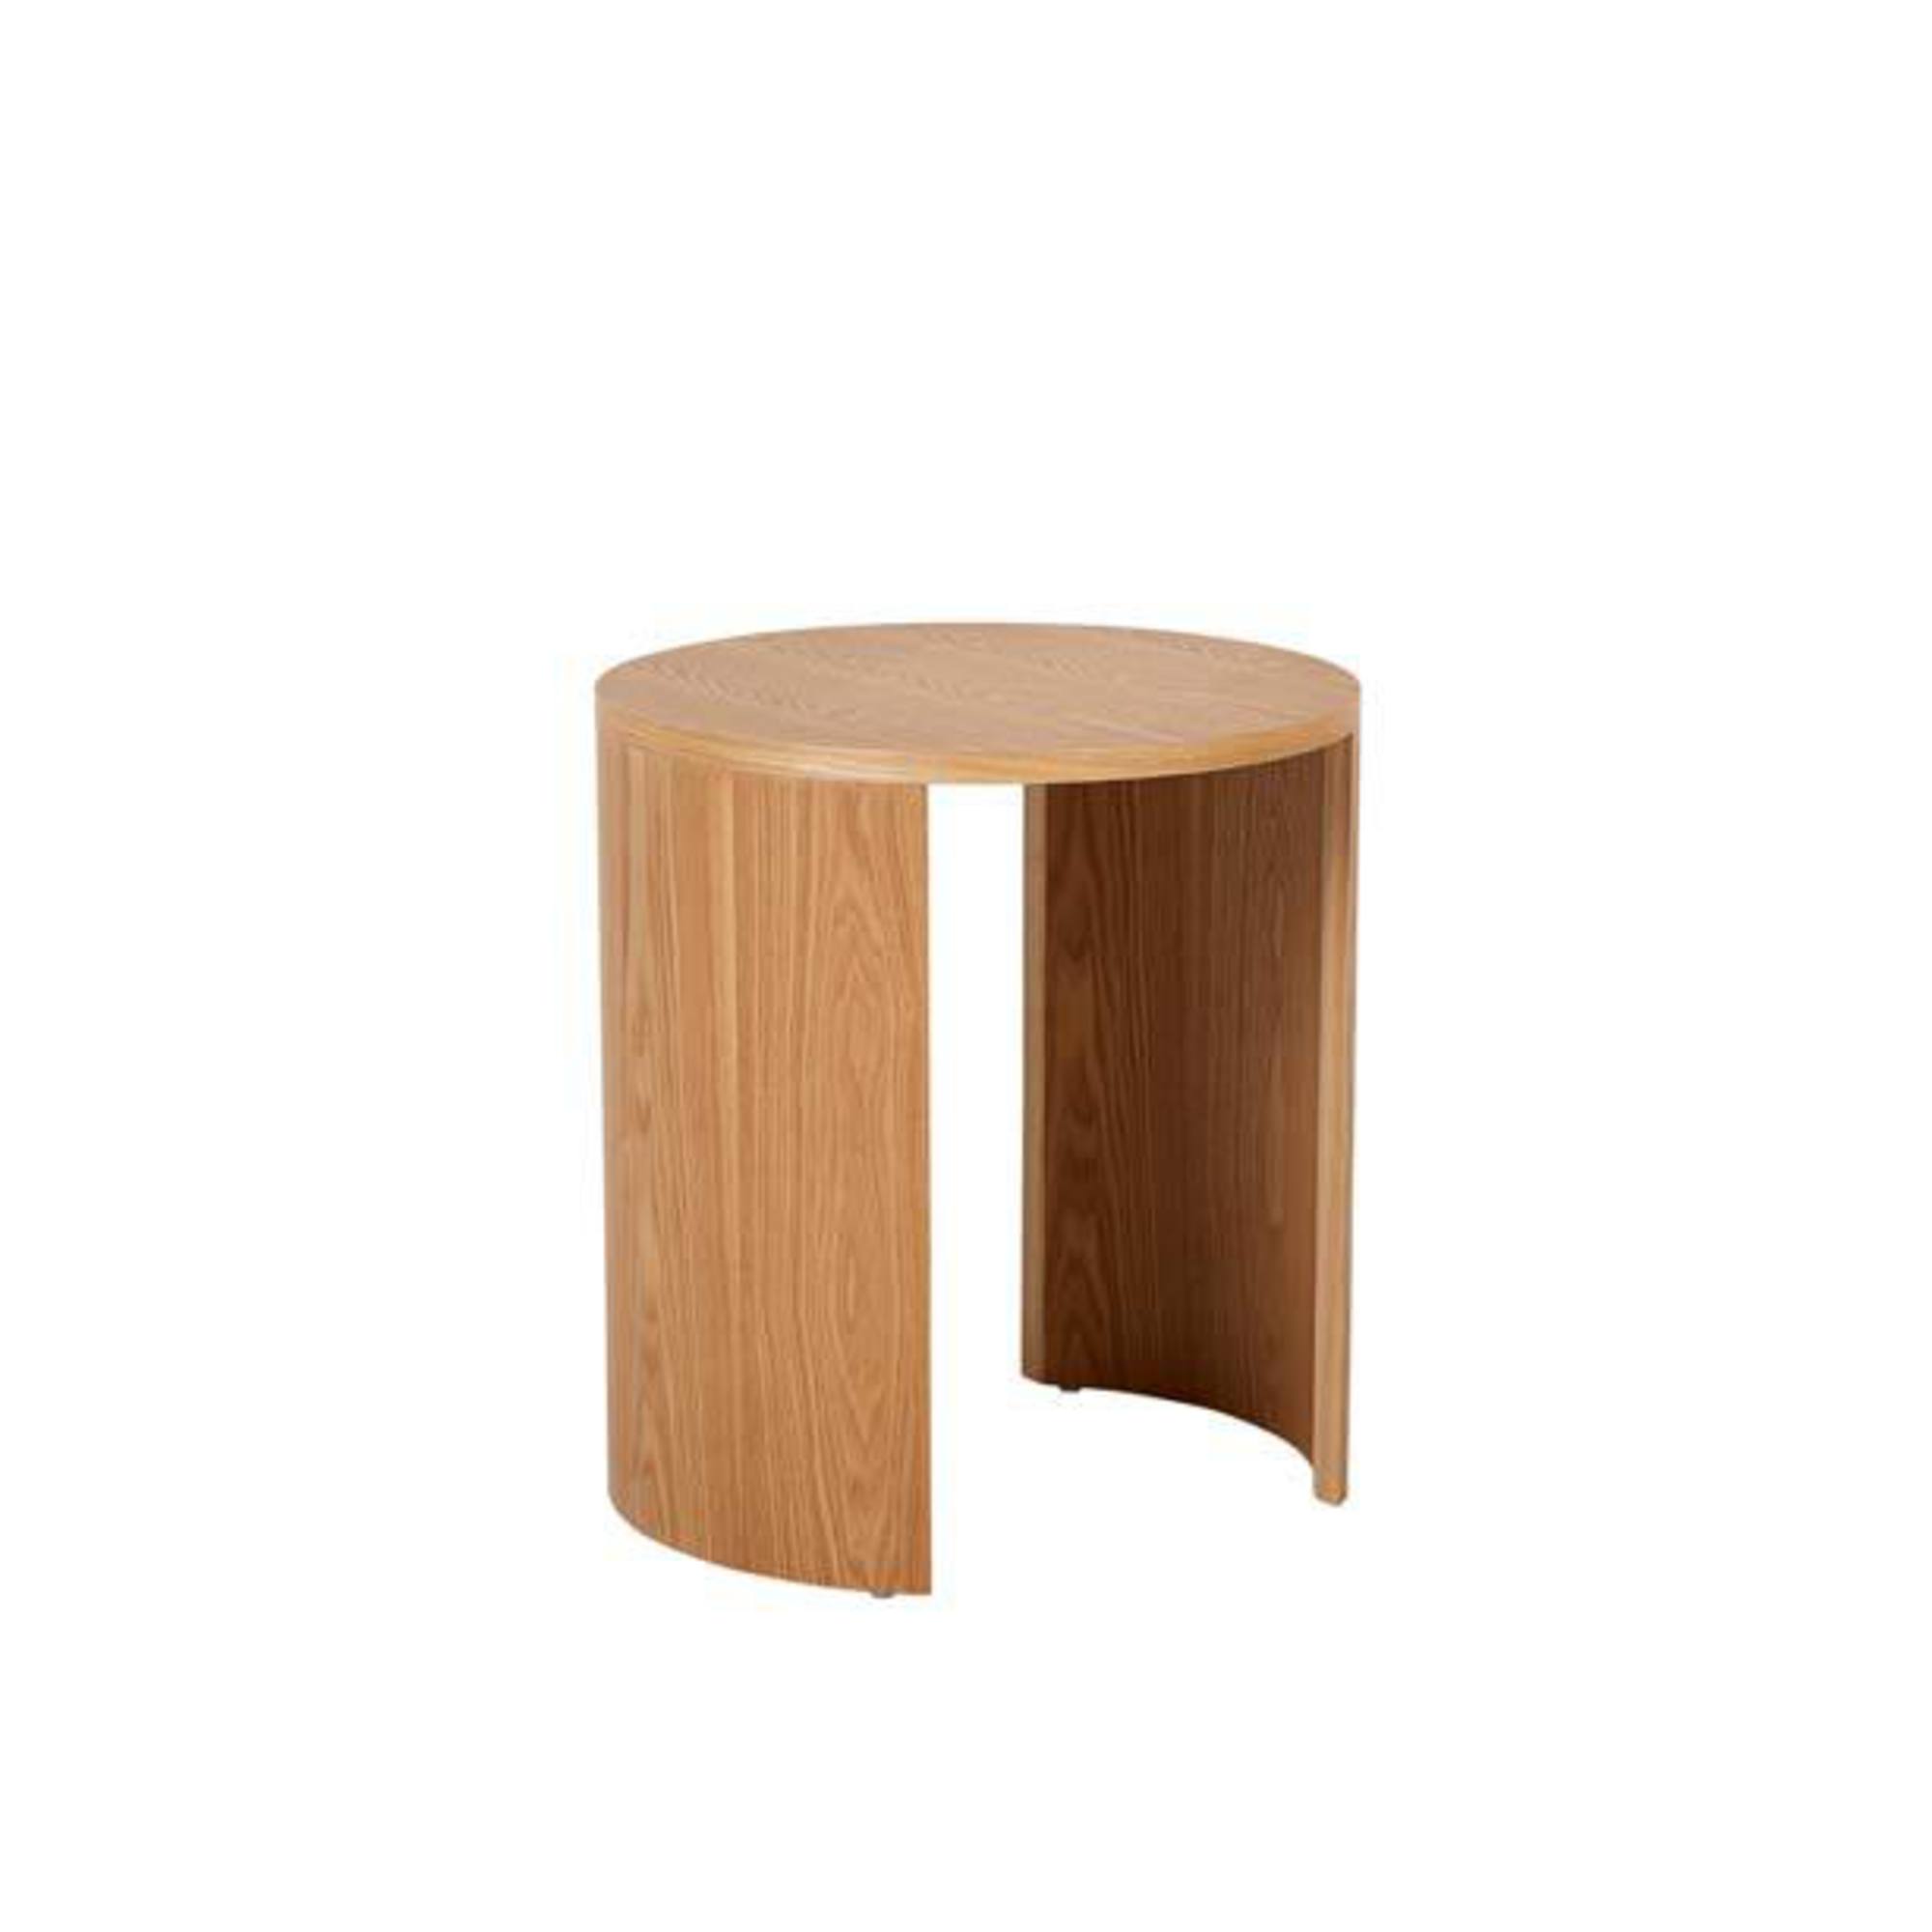 Oberon Crescent Side Table image 12